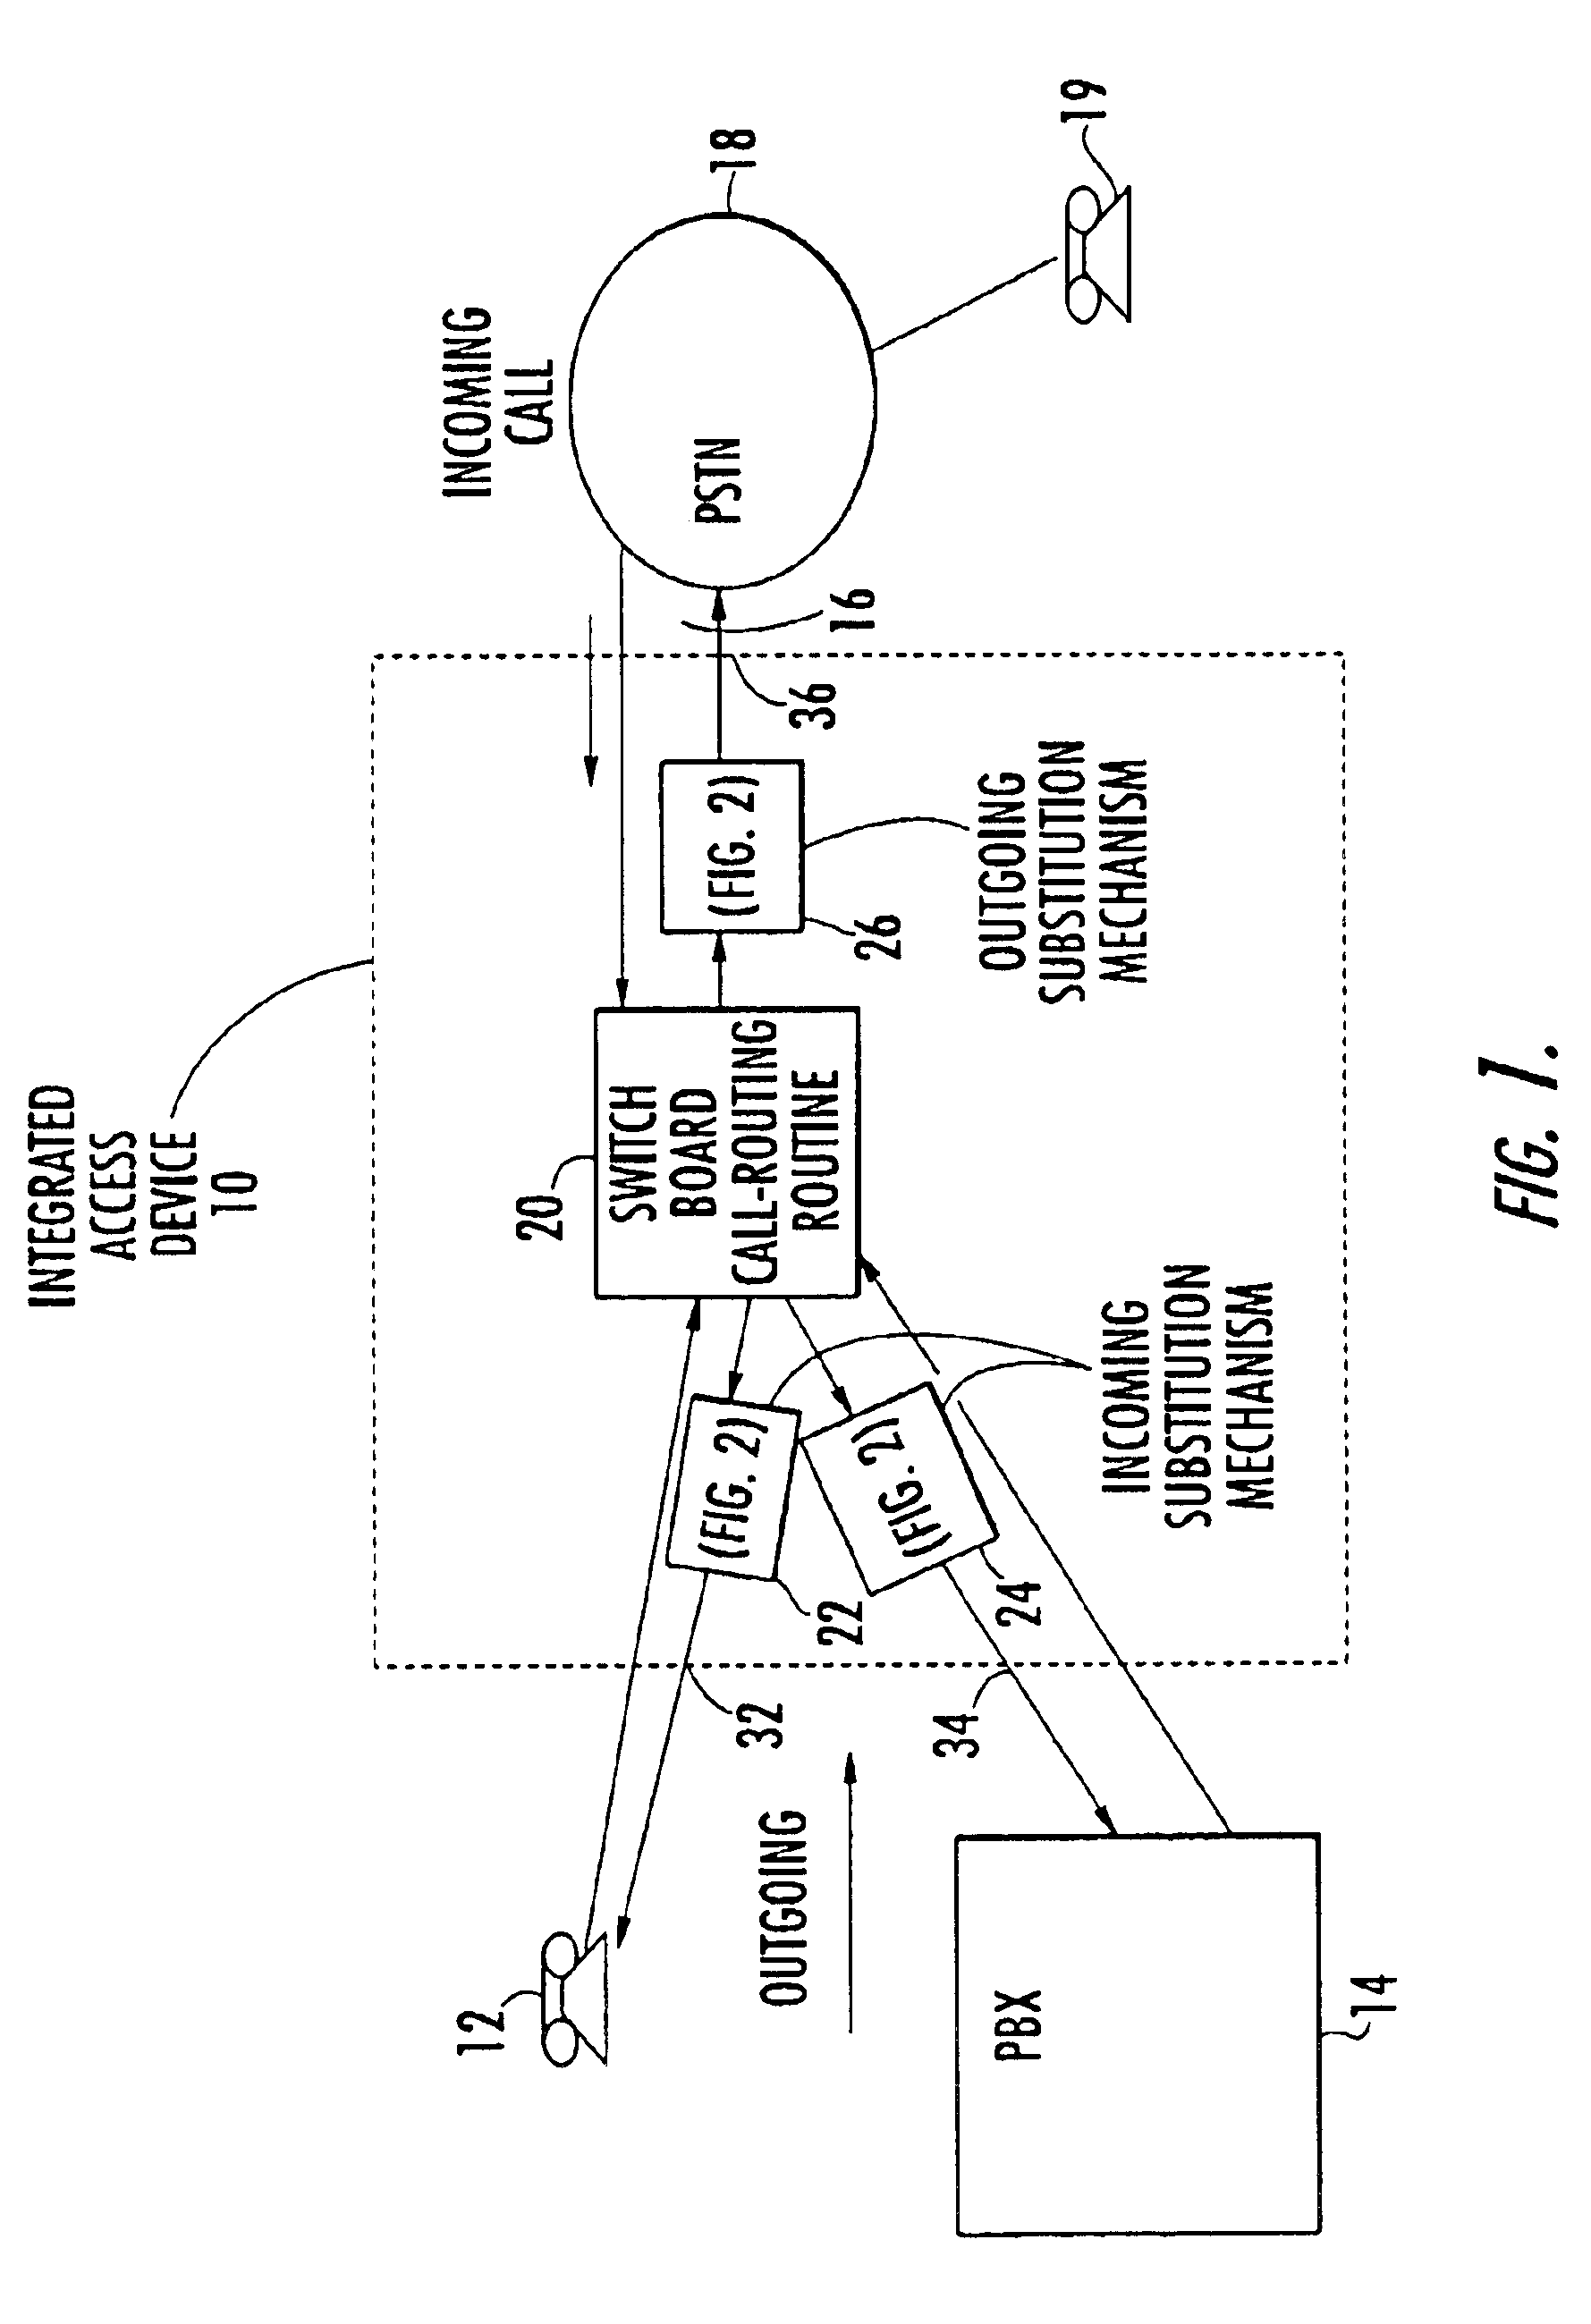 Call-routing mechanism for automatically performing number substitution in an integrated access device